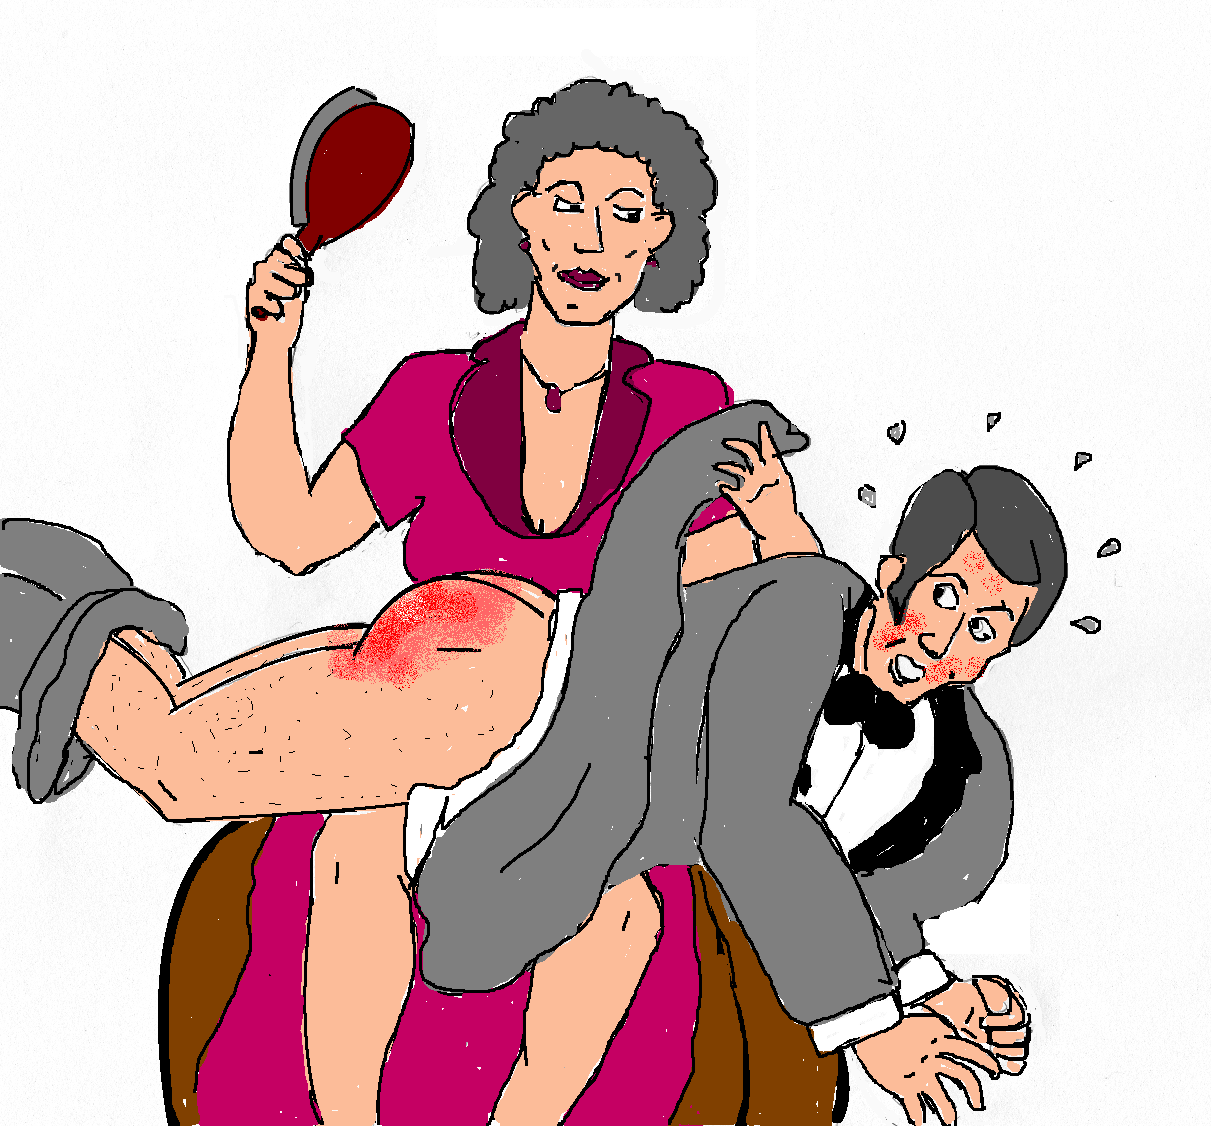 F M Spanking Animations - Glenmore's Adult Spanking Stories & Art: Just what the ...